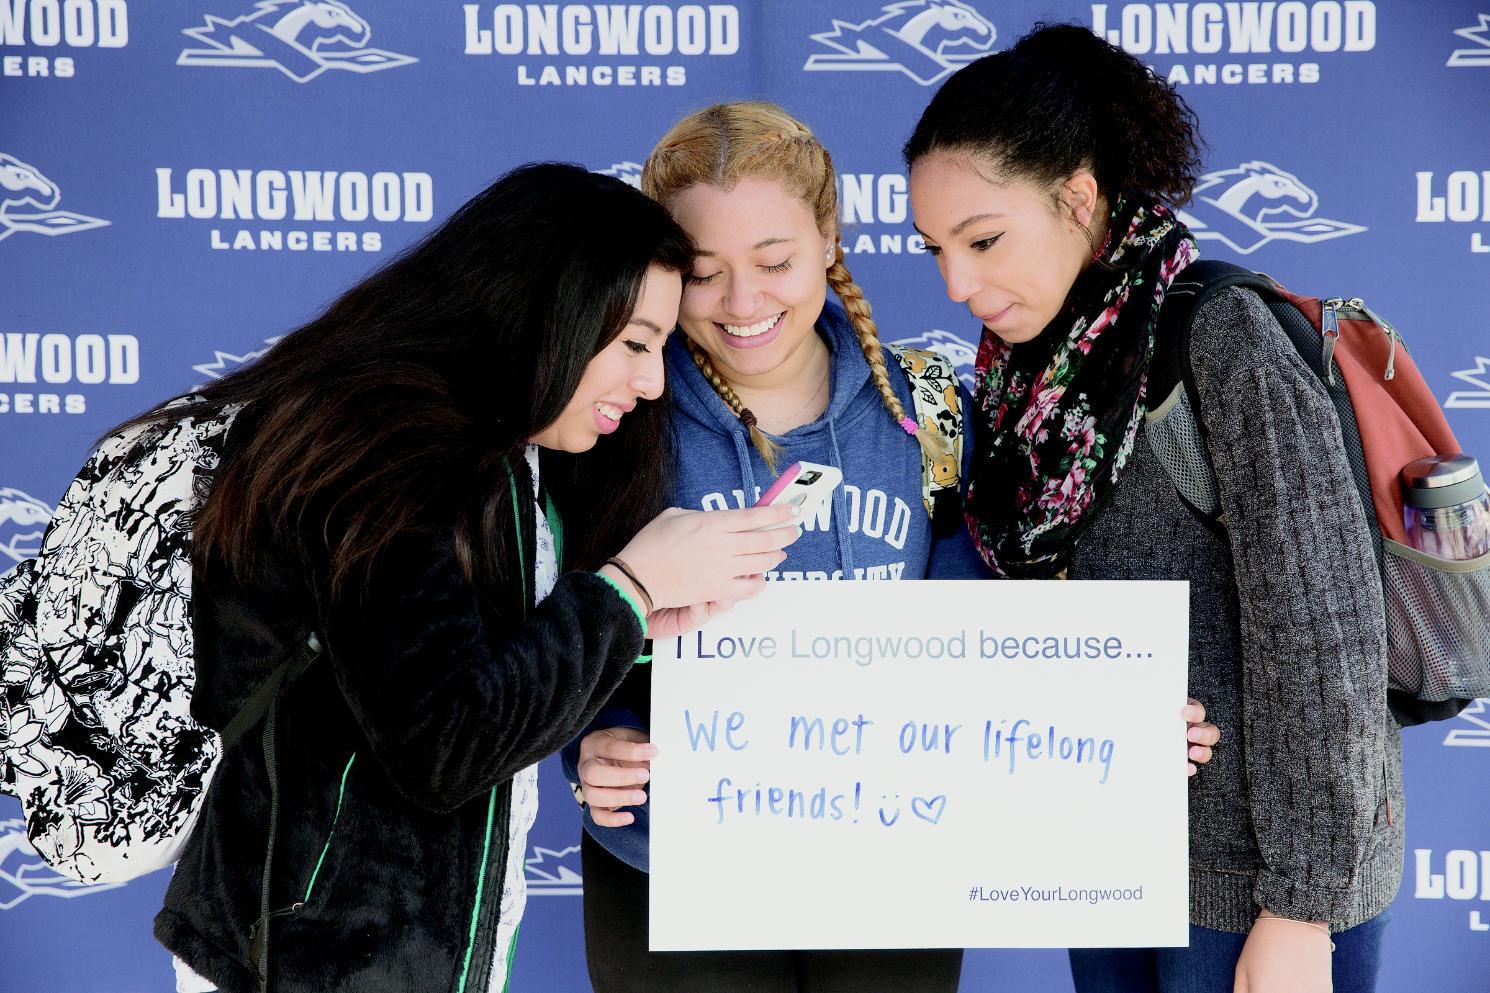 Social media helps spread the message on Love Your Longwood day.